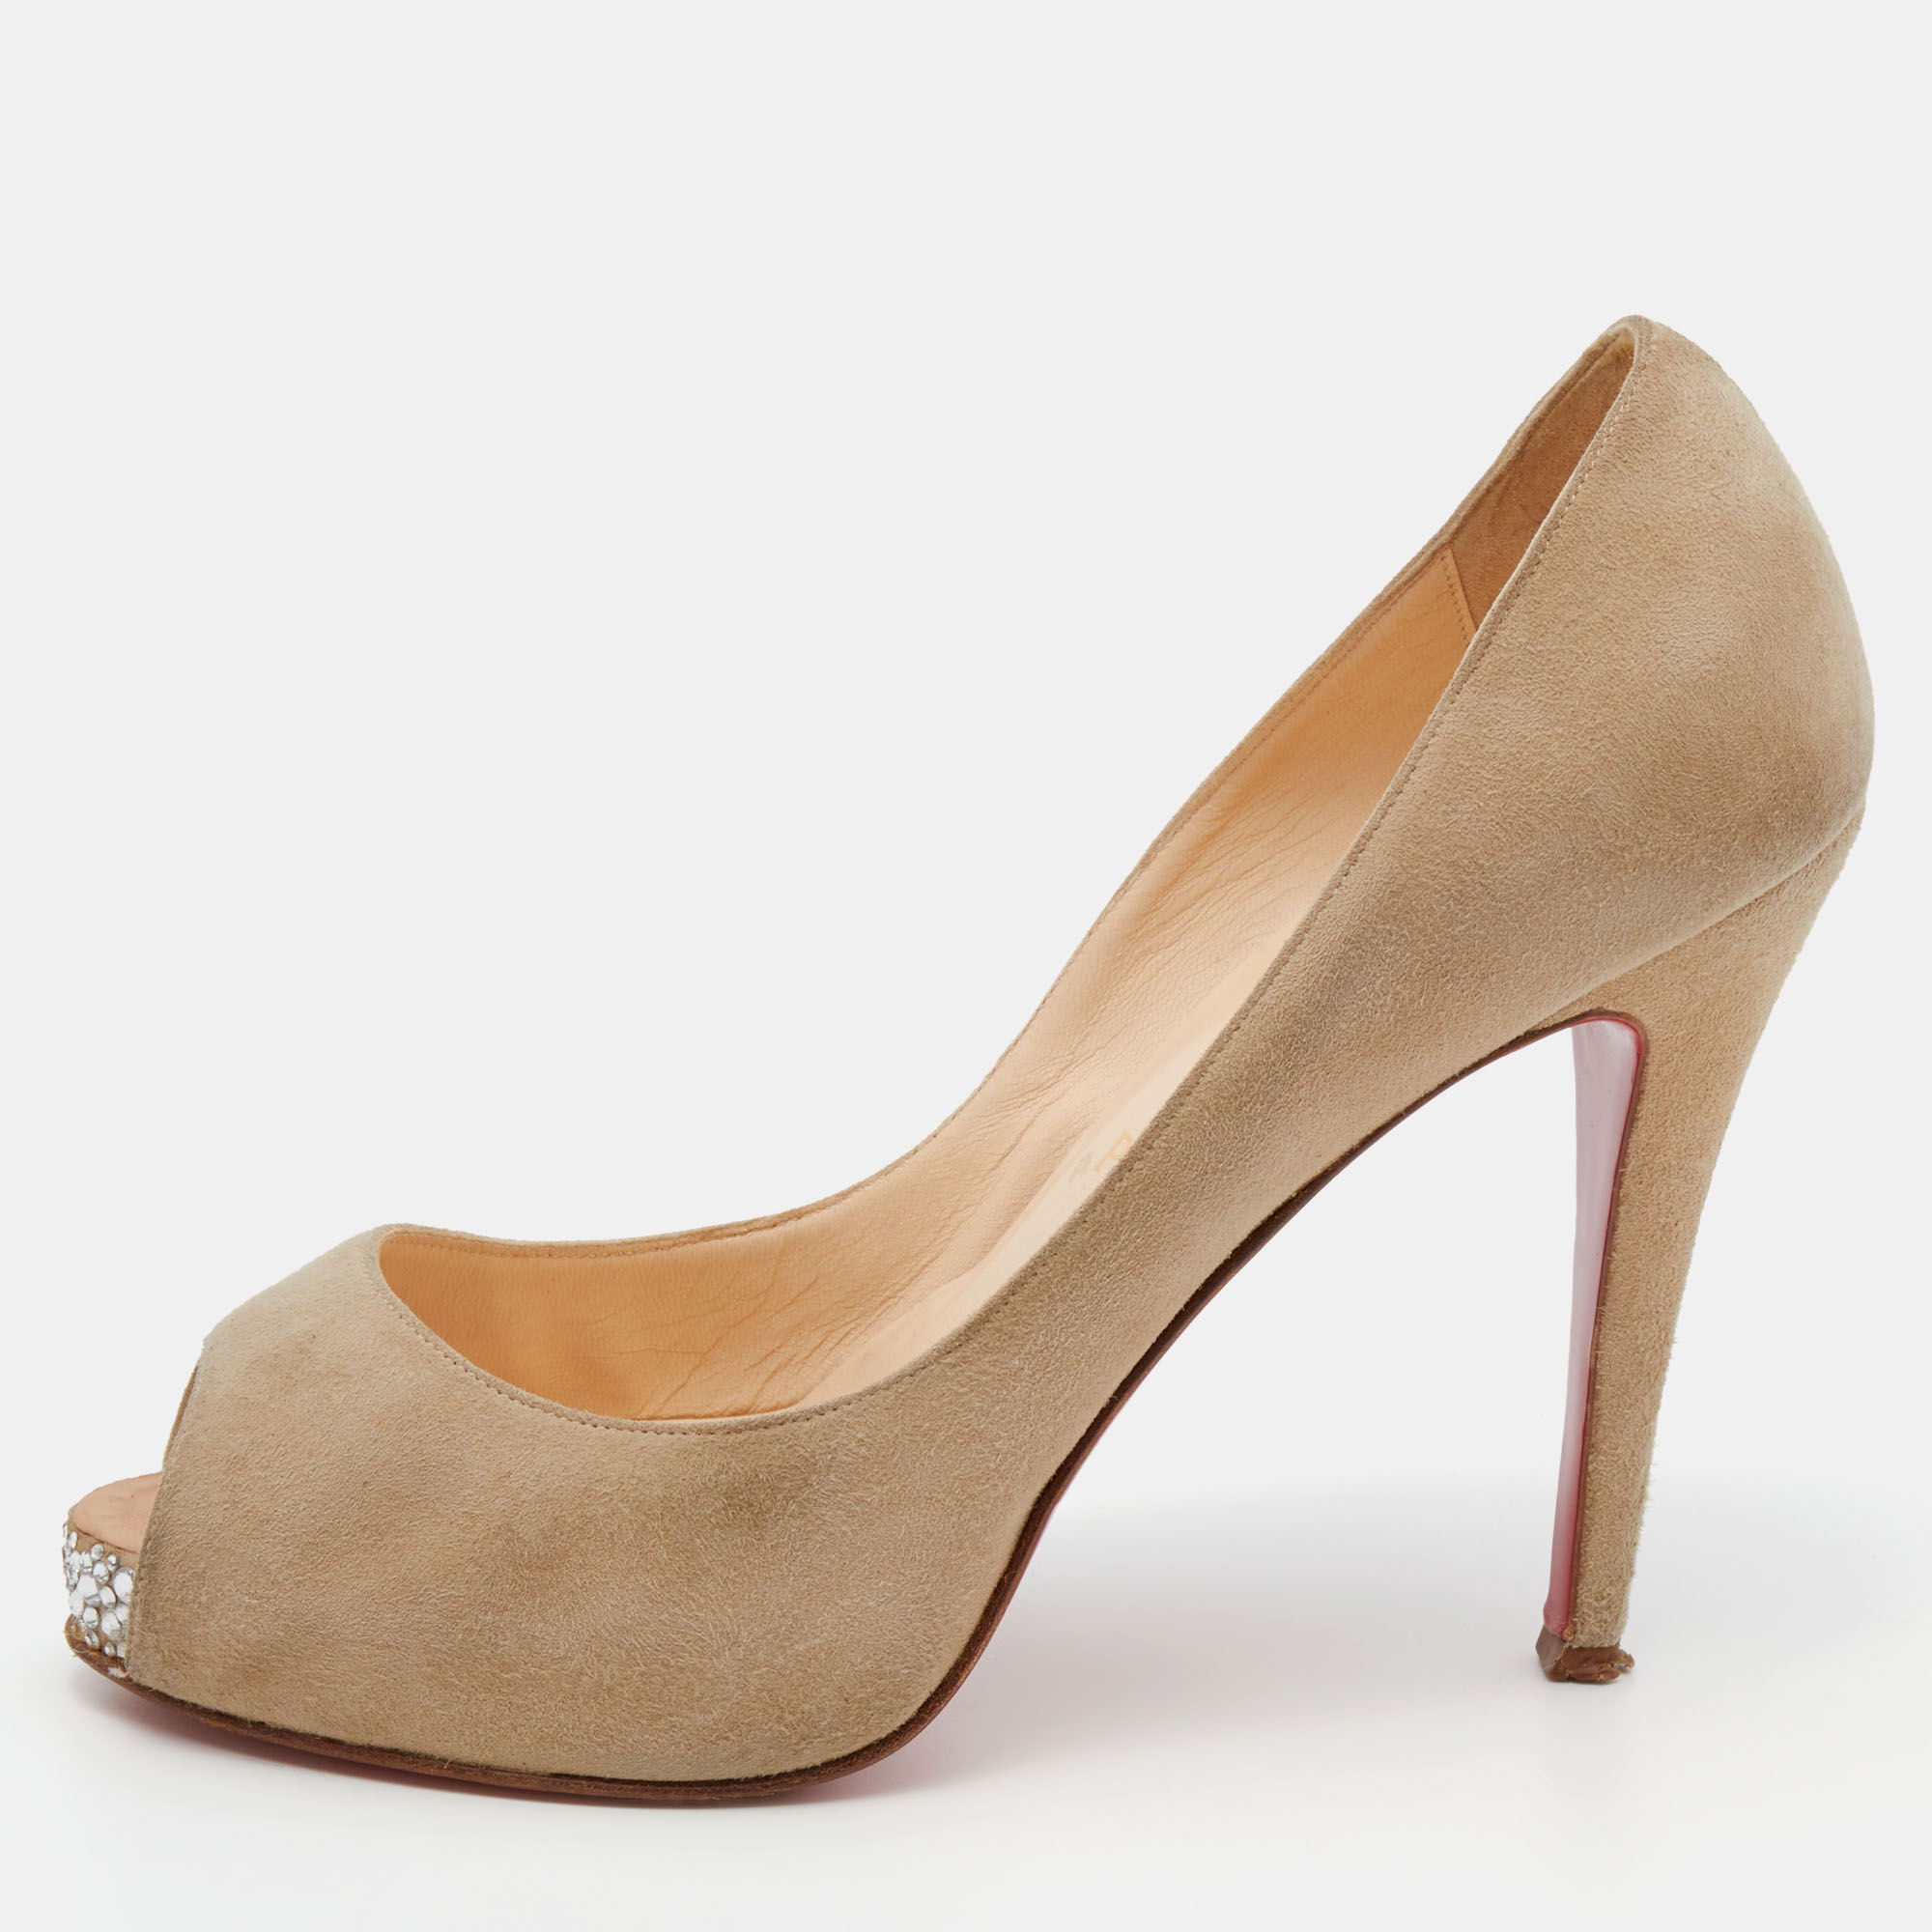 Christian louboutin beige suede very prive crystal embellished peep toe pumps size 38.5